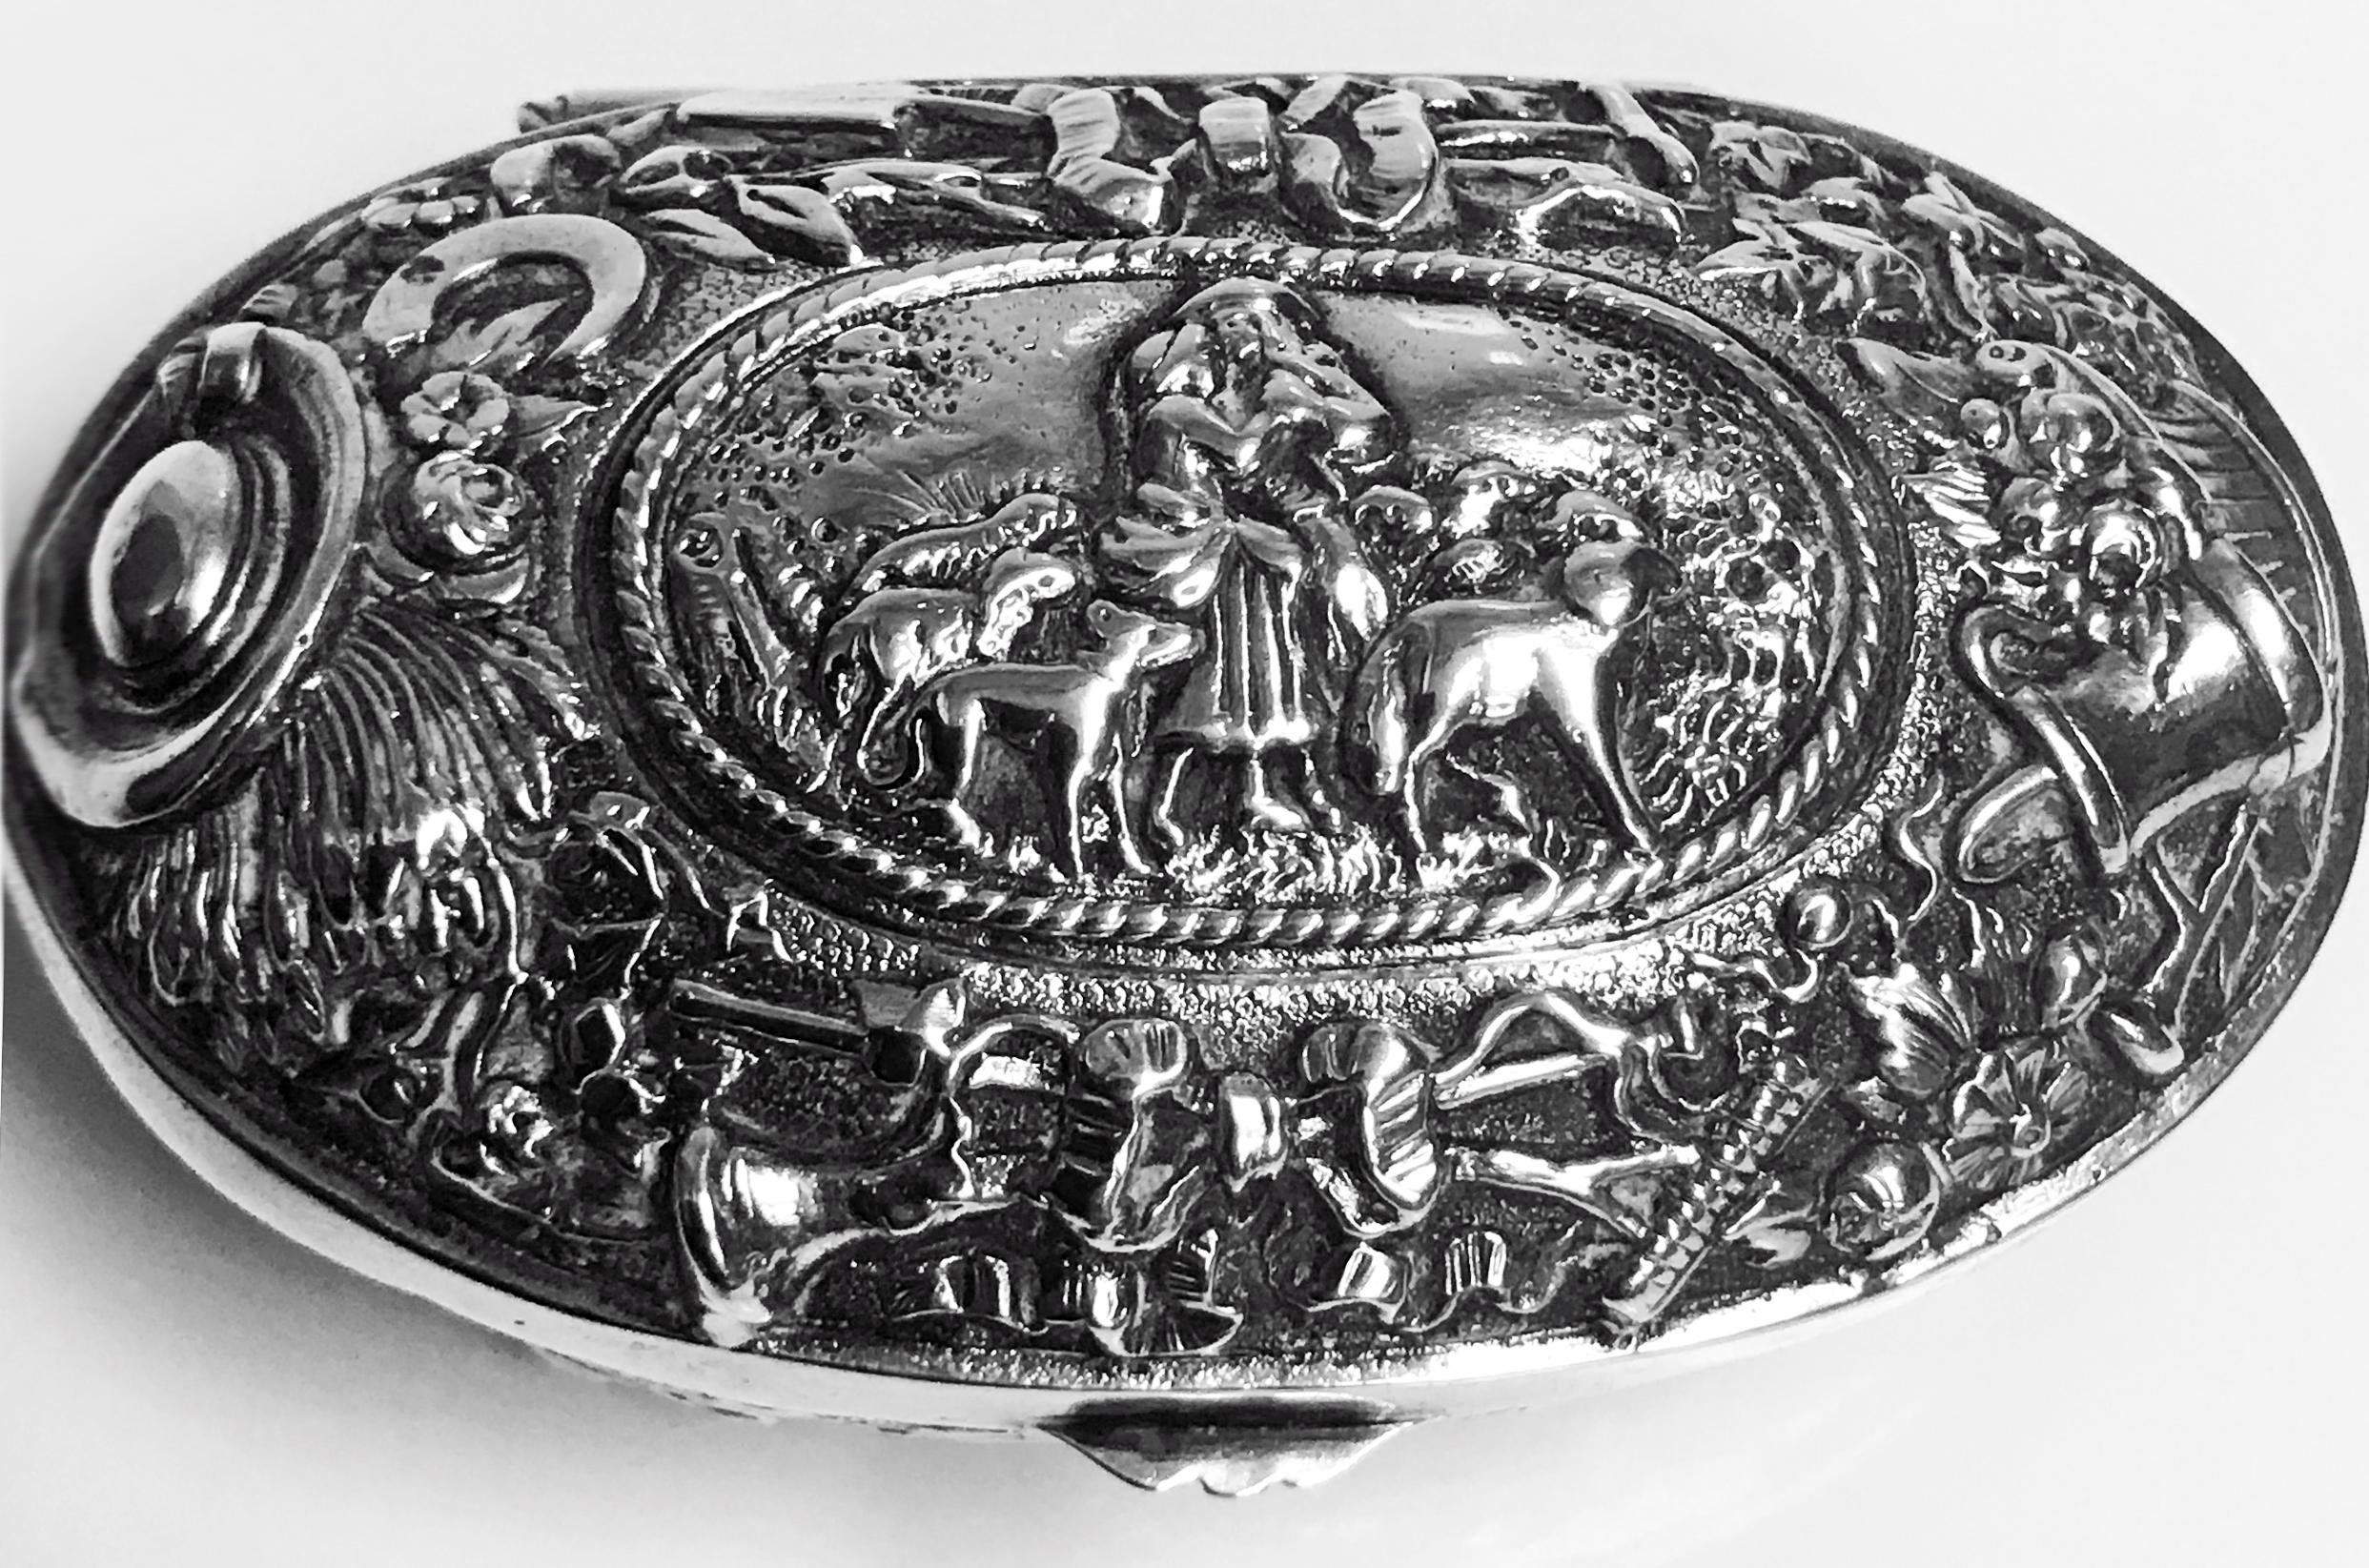 Antique Silver Neresheimer Hanau pseudo marks box of oval form, with embossed pastoral farmyard scenes to the top, the lower sides with scroll and floral decoration, interior gilt. Hanau pseudo marks and retailers stamp of Ryrie of Canada to base.